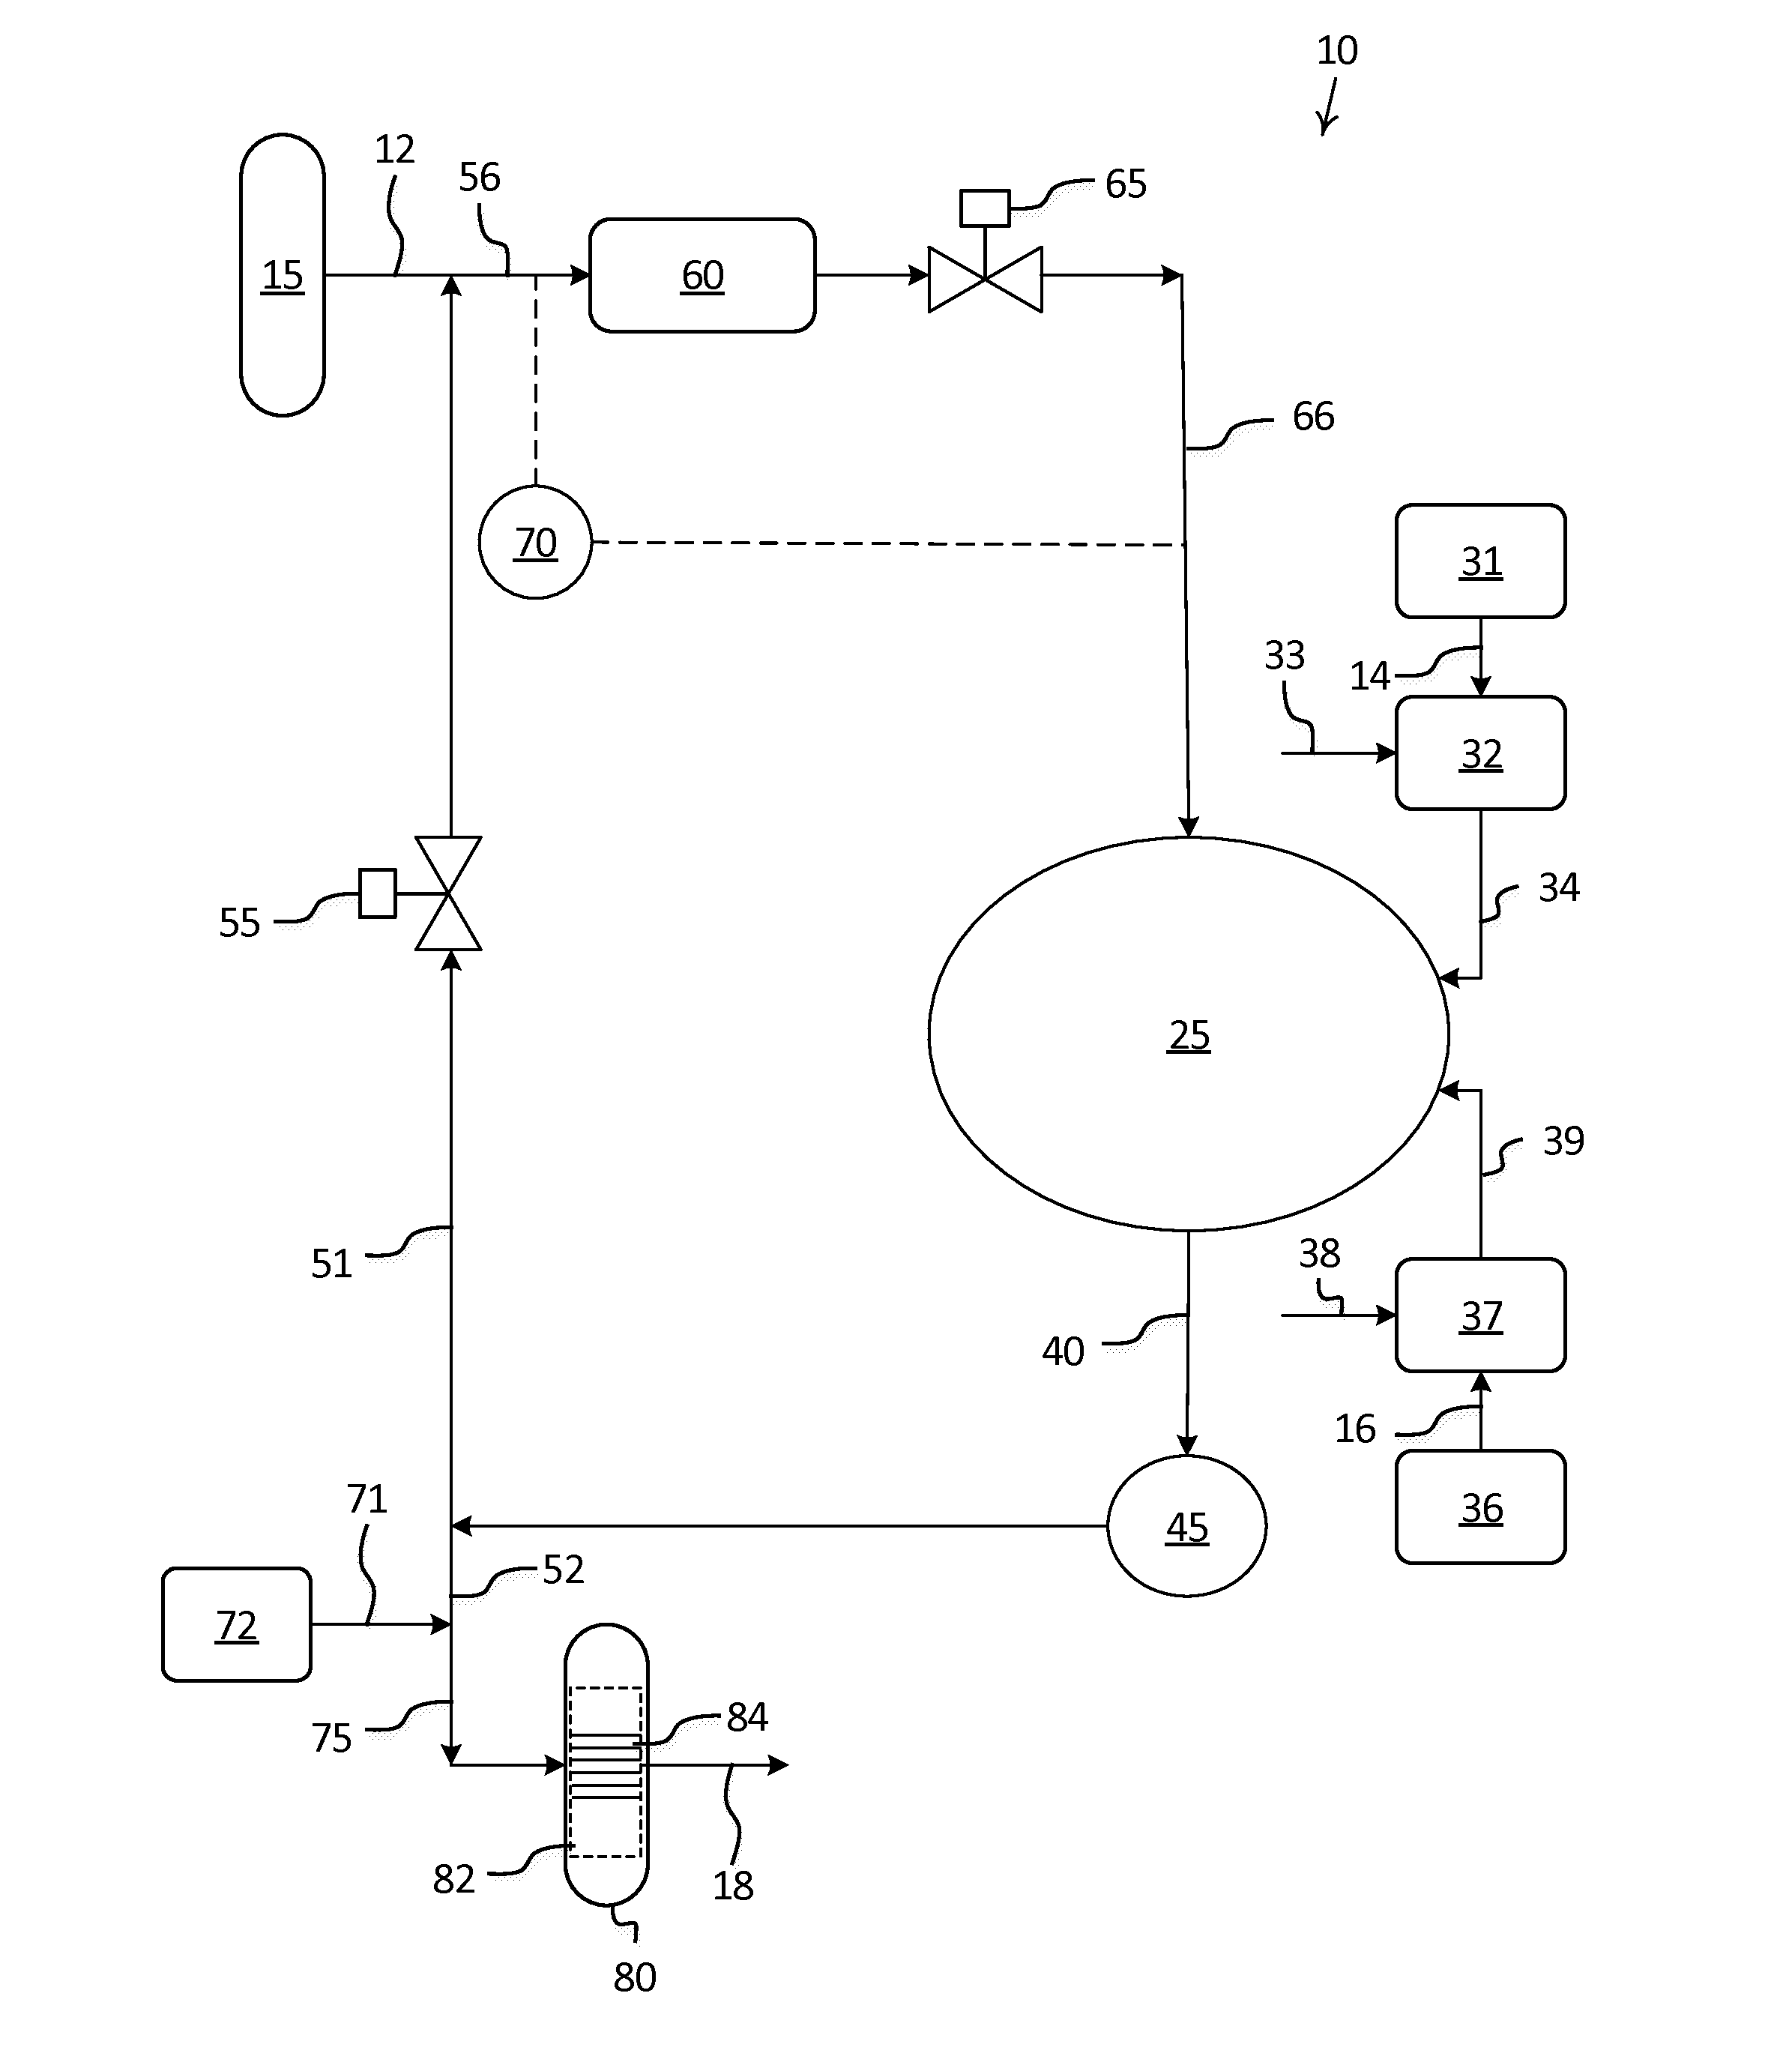 Methods and apparatuses for co-processing pyrolysis oil